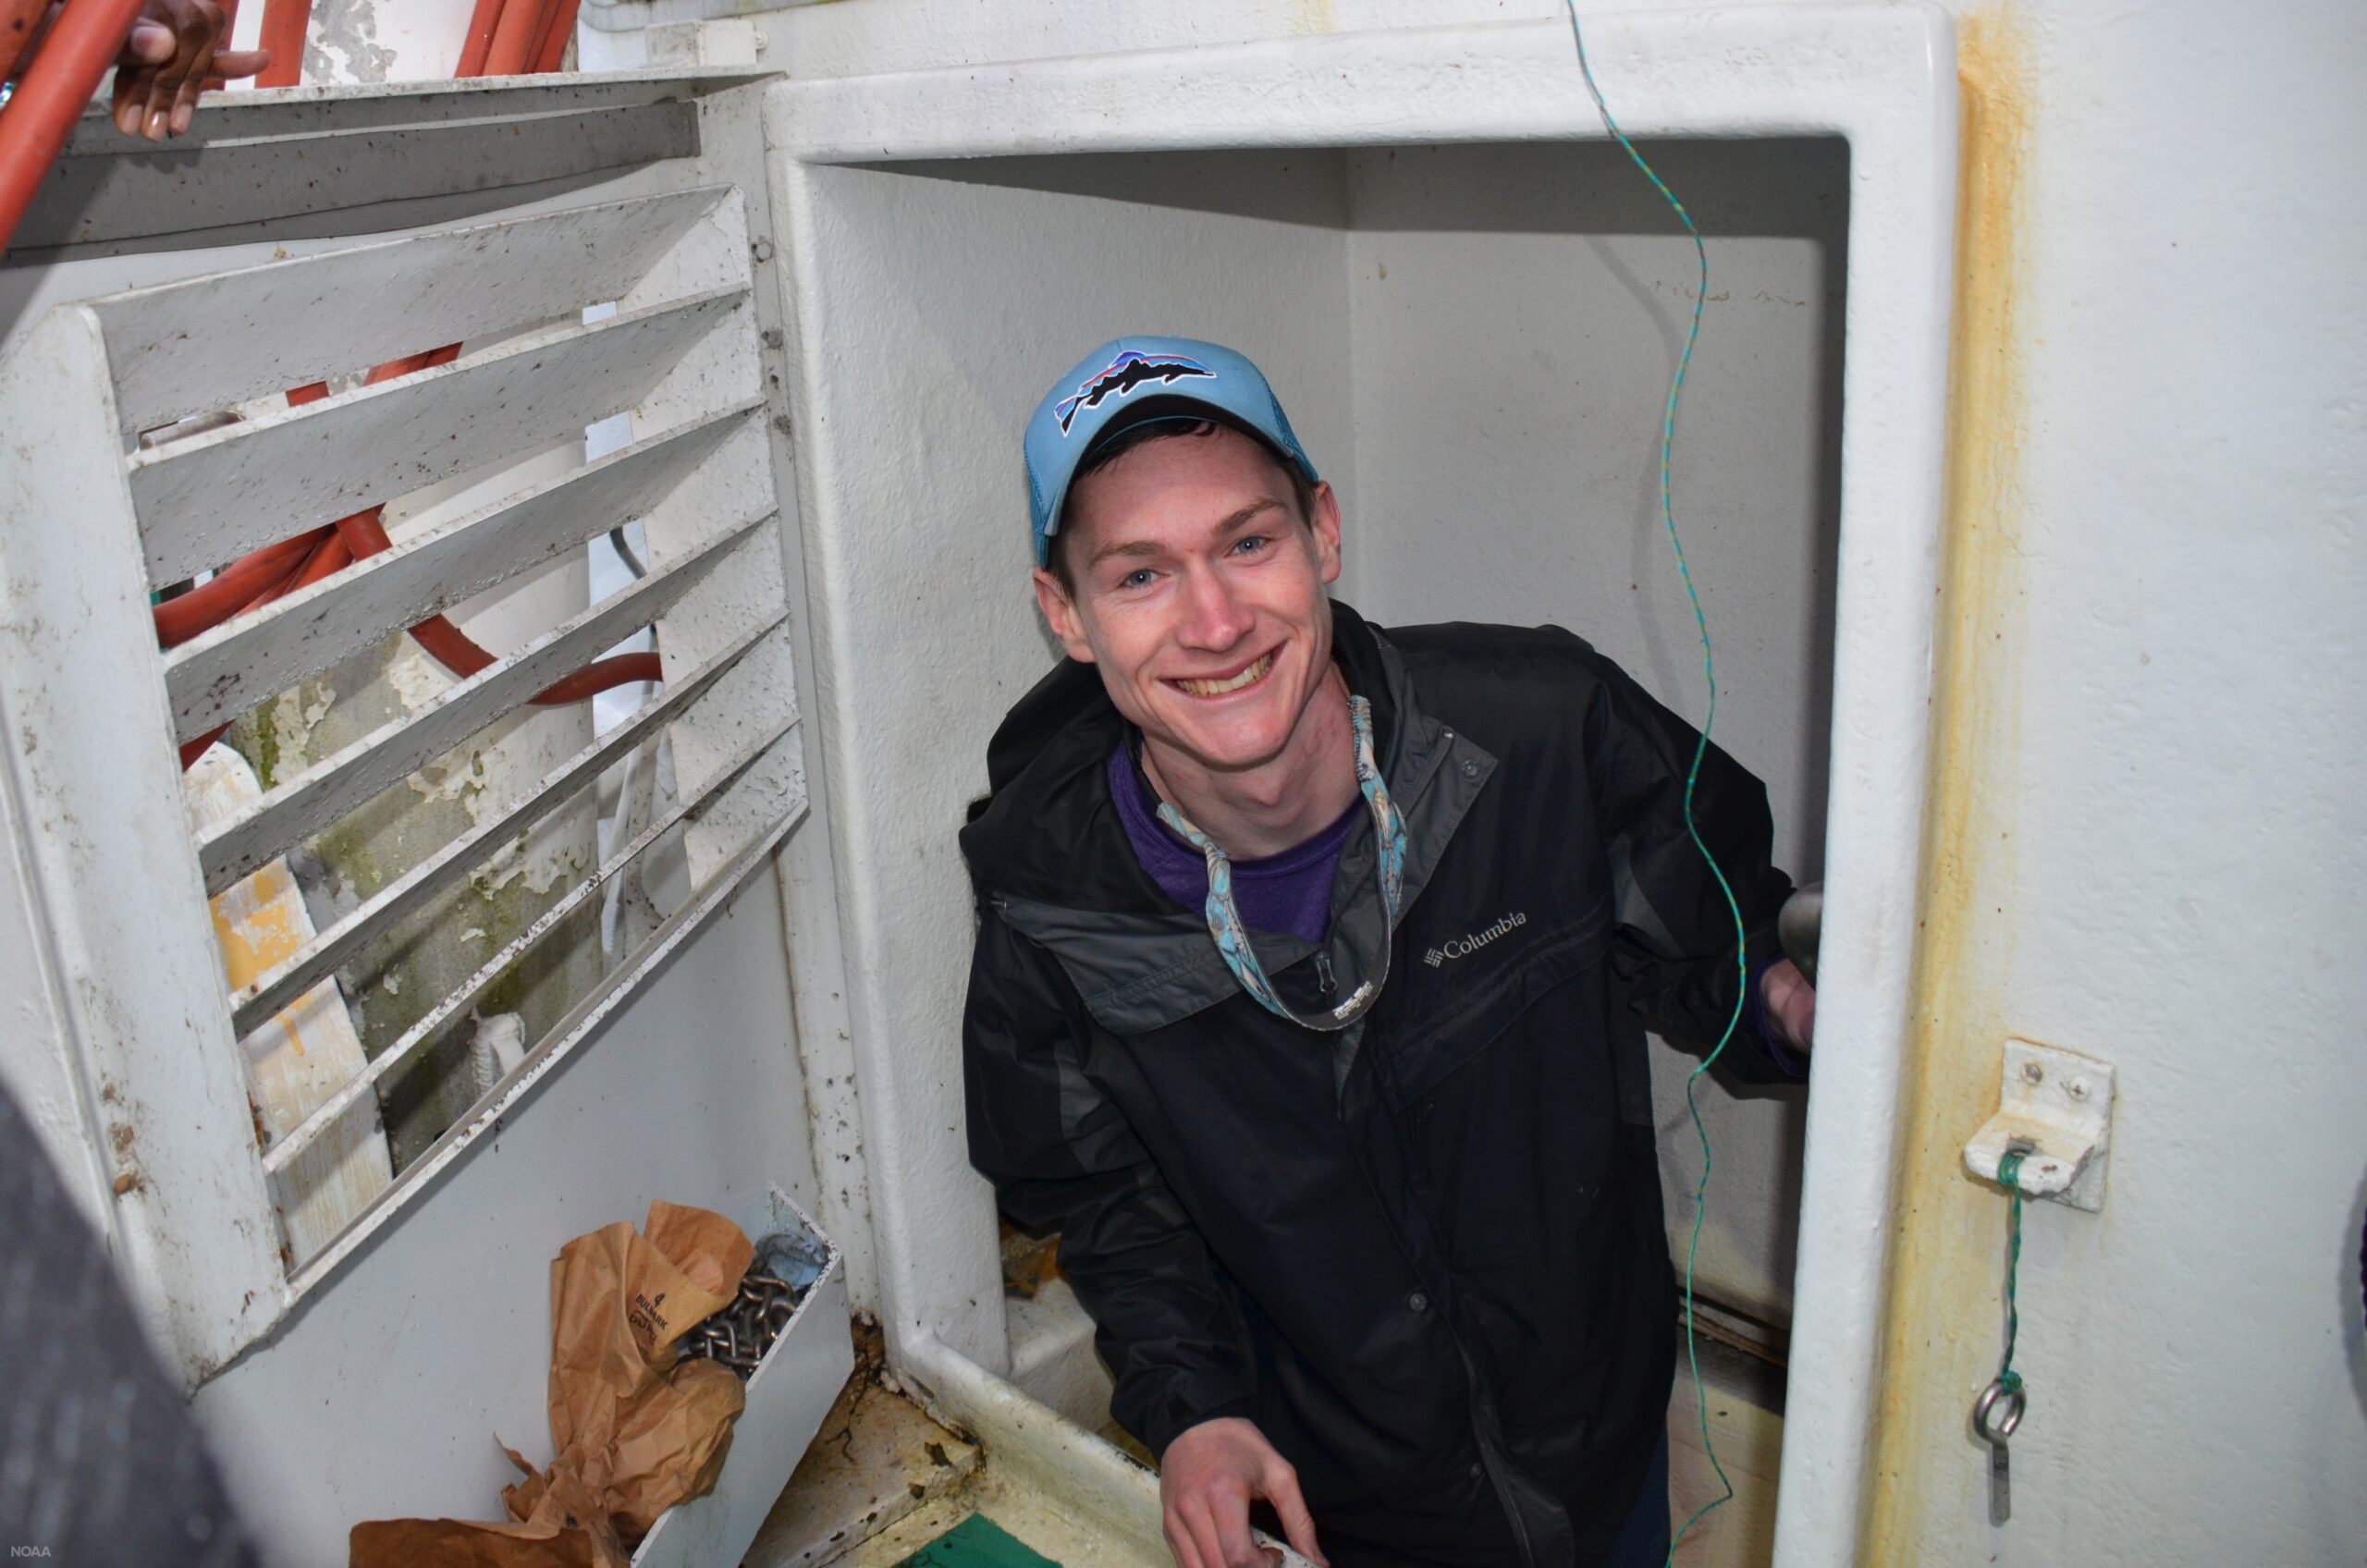 Kenneth Erickson climbs out of the engine room of a commercial fishing vessel in Louisiana during the Louisiana Sea Grant Graduate Research Scholar’s trip in December of 2018